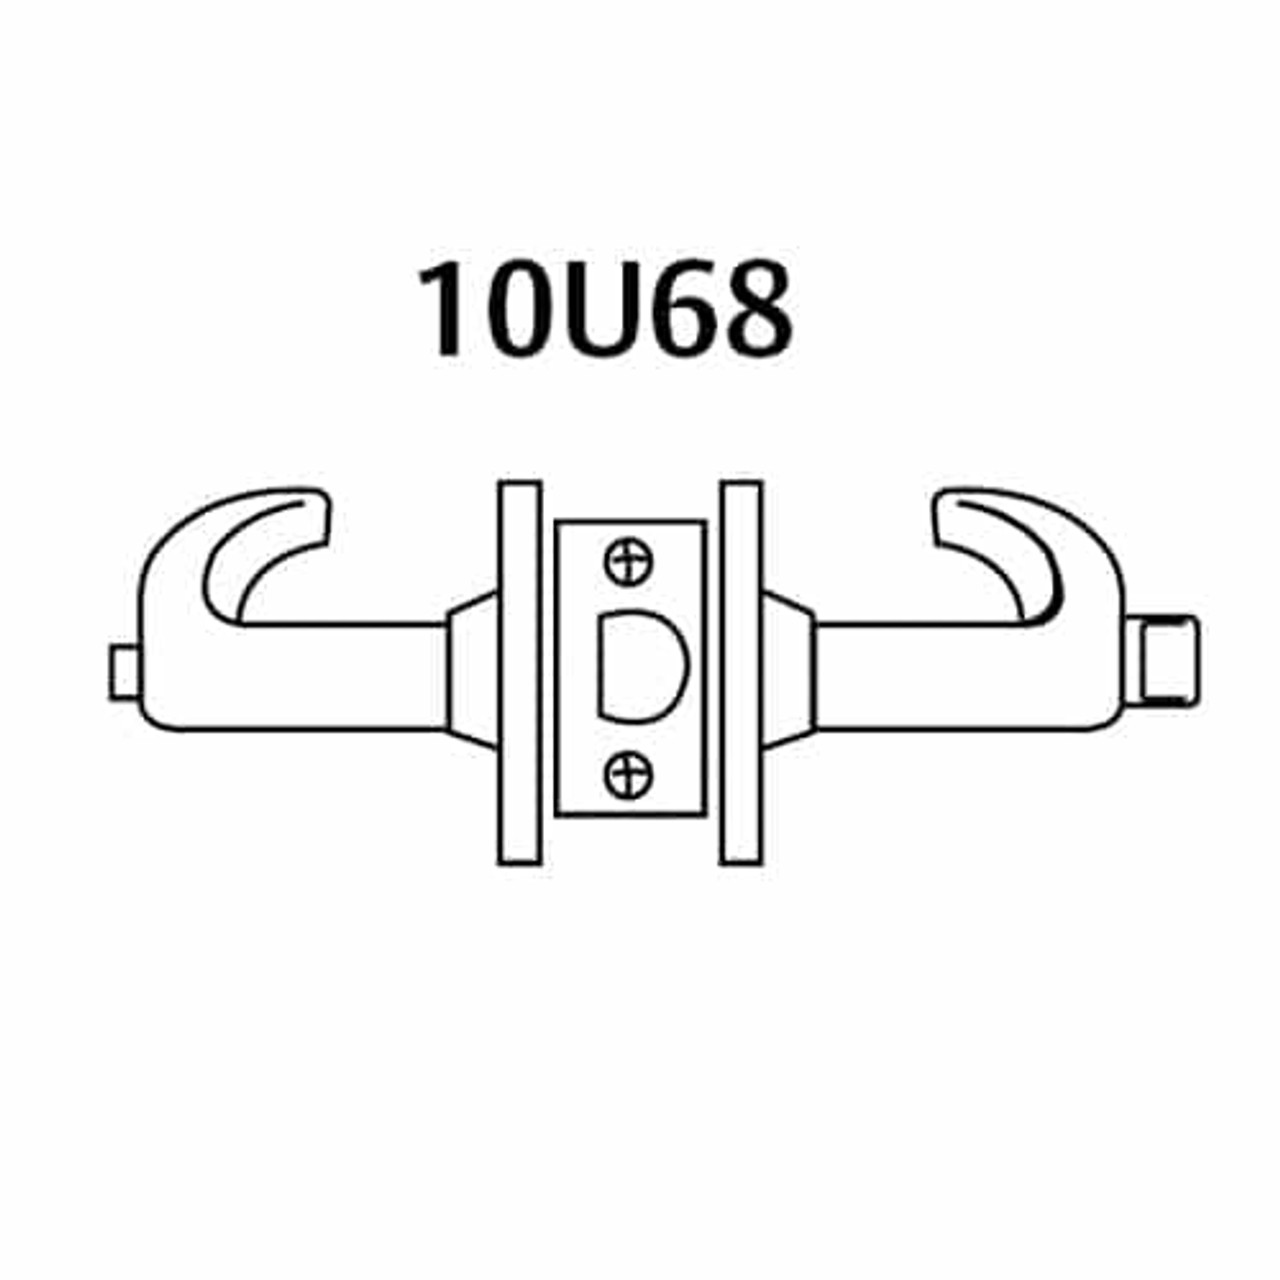 28-10U68-GB-26D Sargent 10 Line Cylindrical Hospital Privacy Locks with B Lever Design and G Rose in Satin Chrome